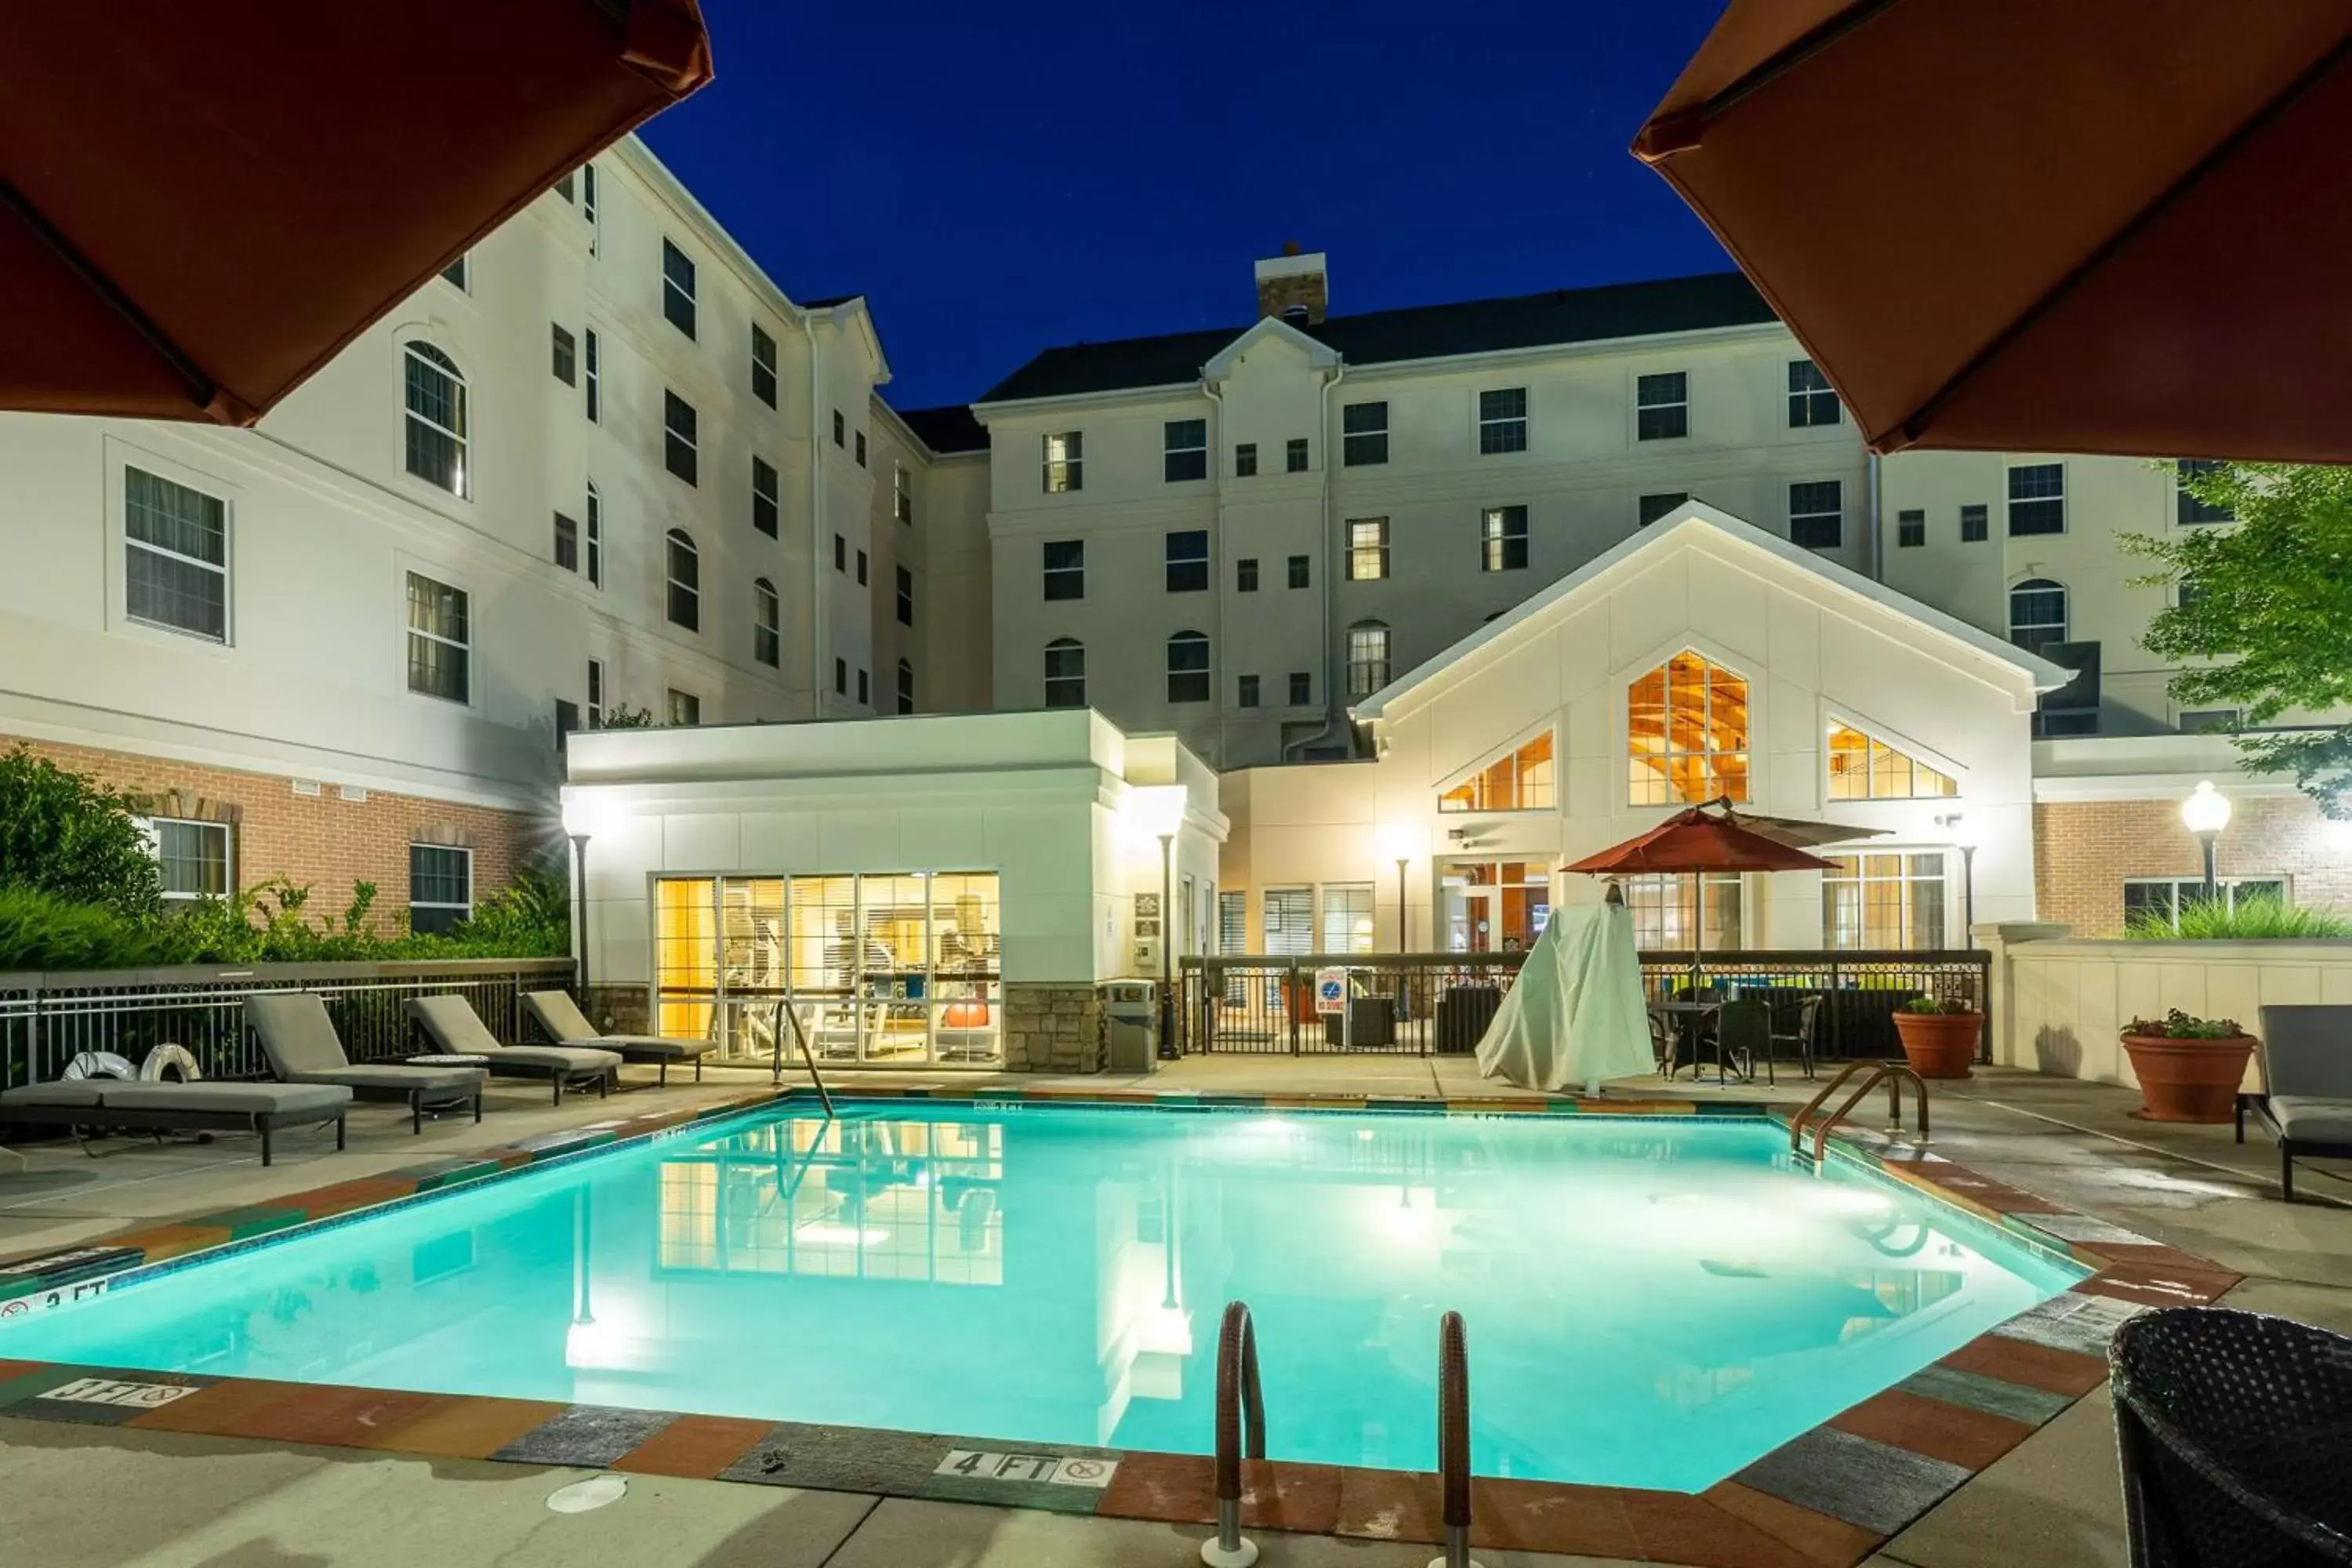 Swimming pool, Property Building in Homewood Suites by Hilton Lawrenceville Duluth